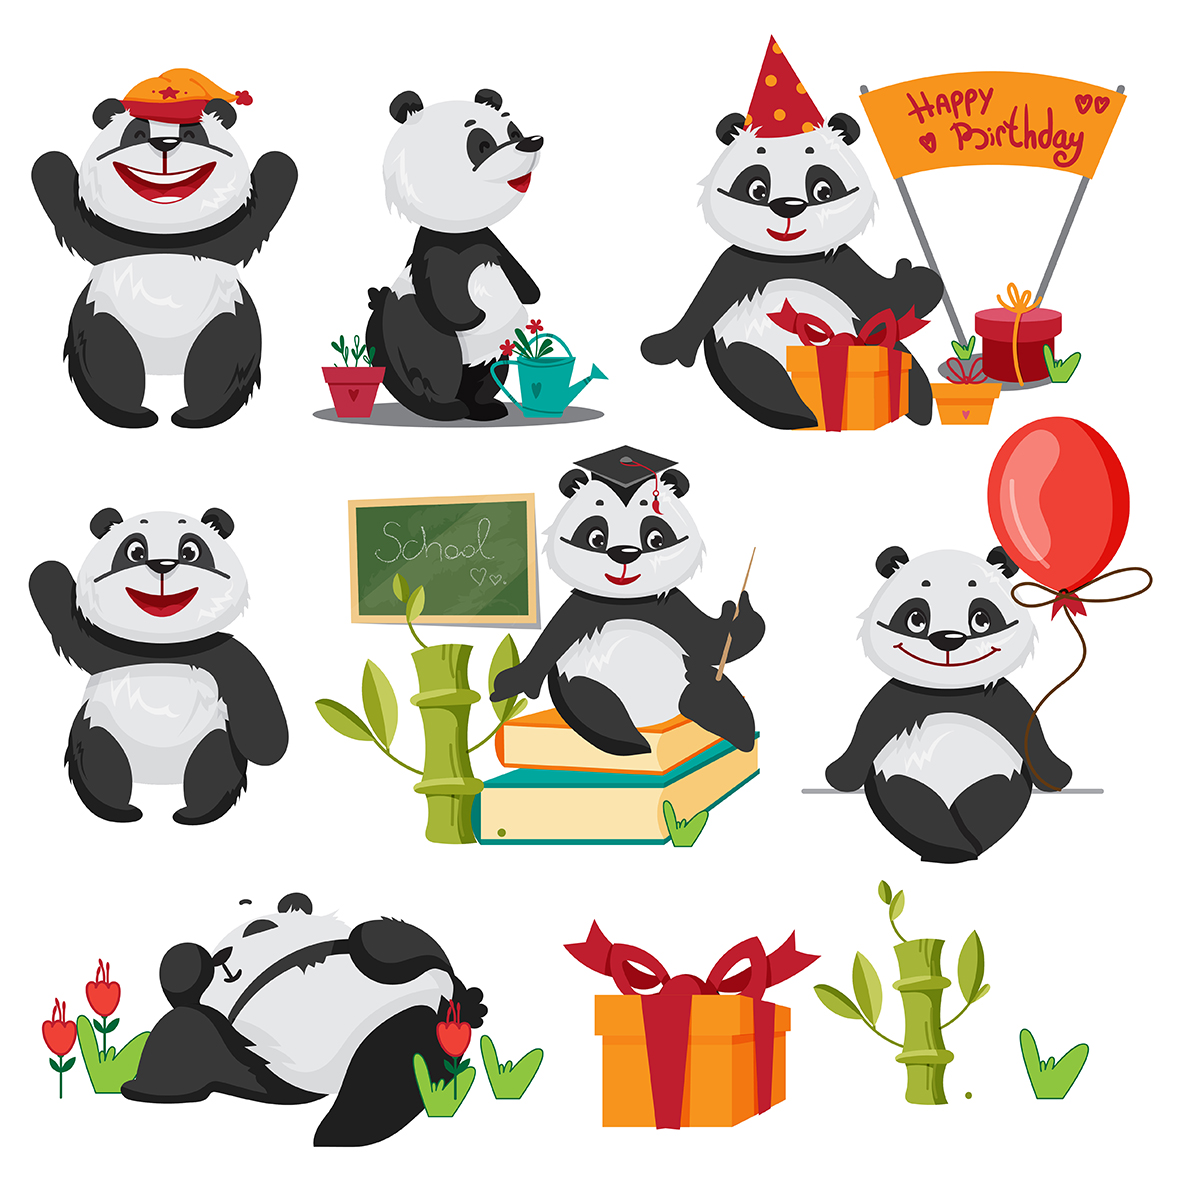 A set of illustrations with the panda character